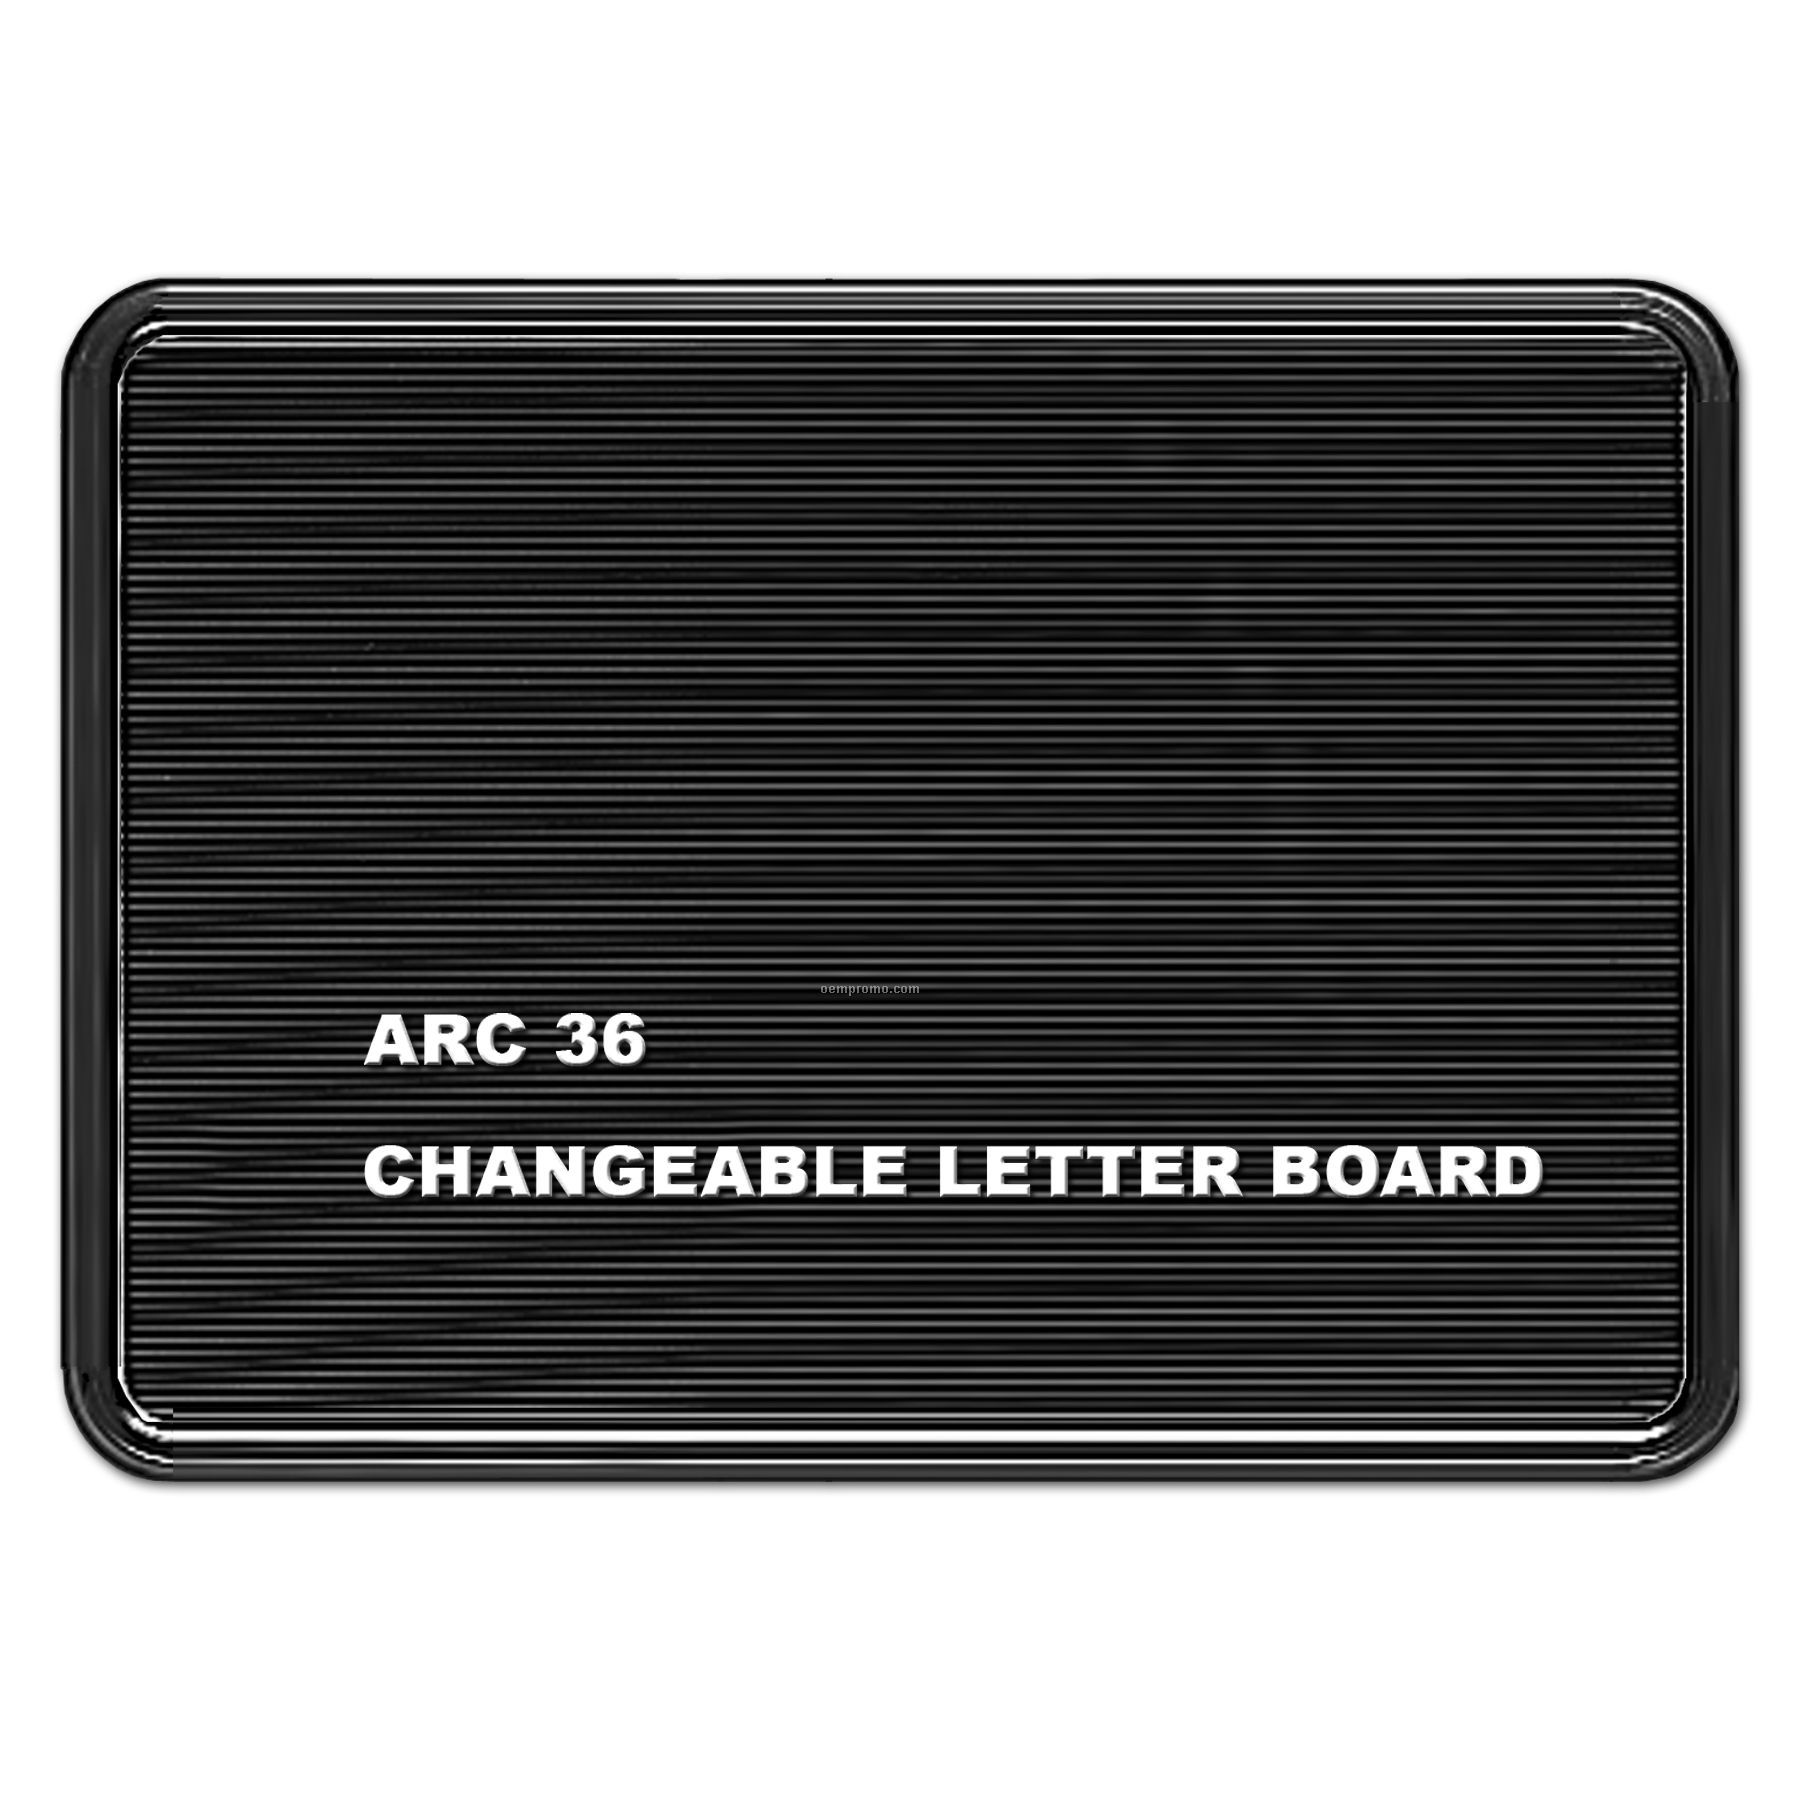 Changeable Letter Board 36"W X 24"H Black Frame With Black Letter Panel.